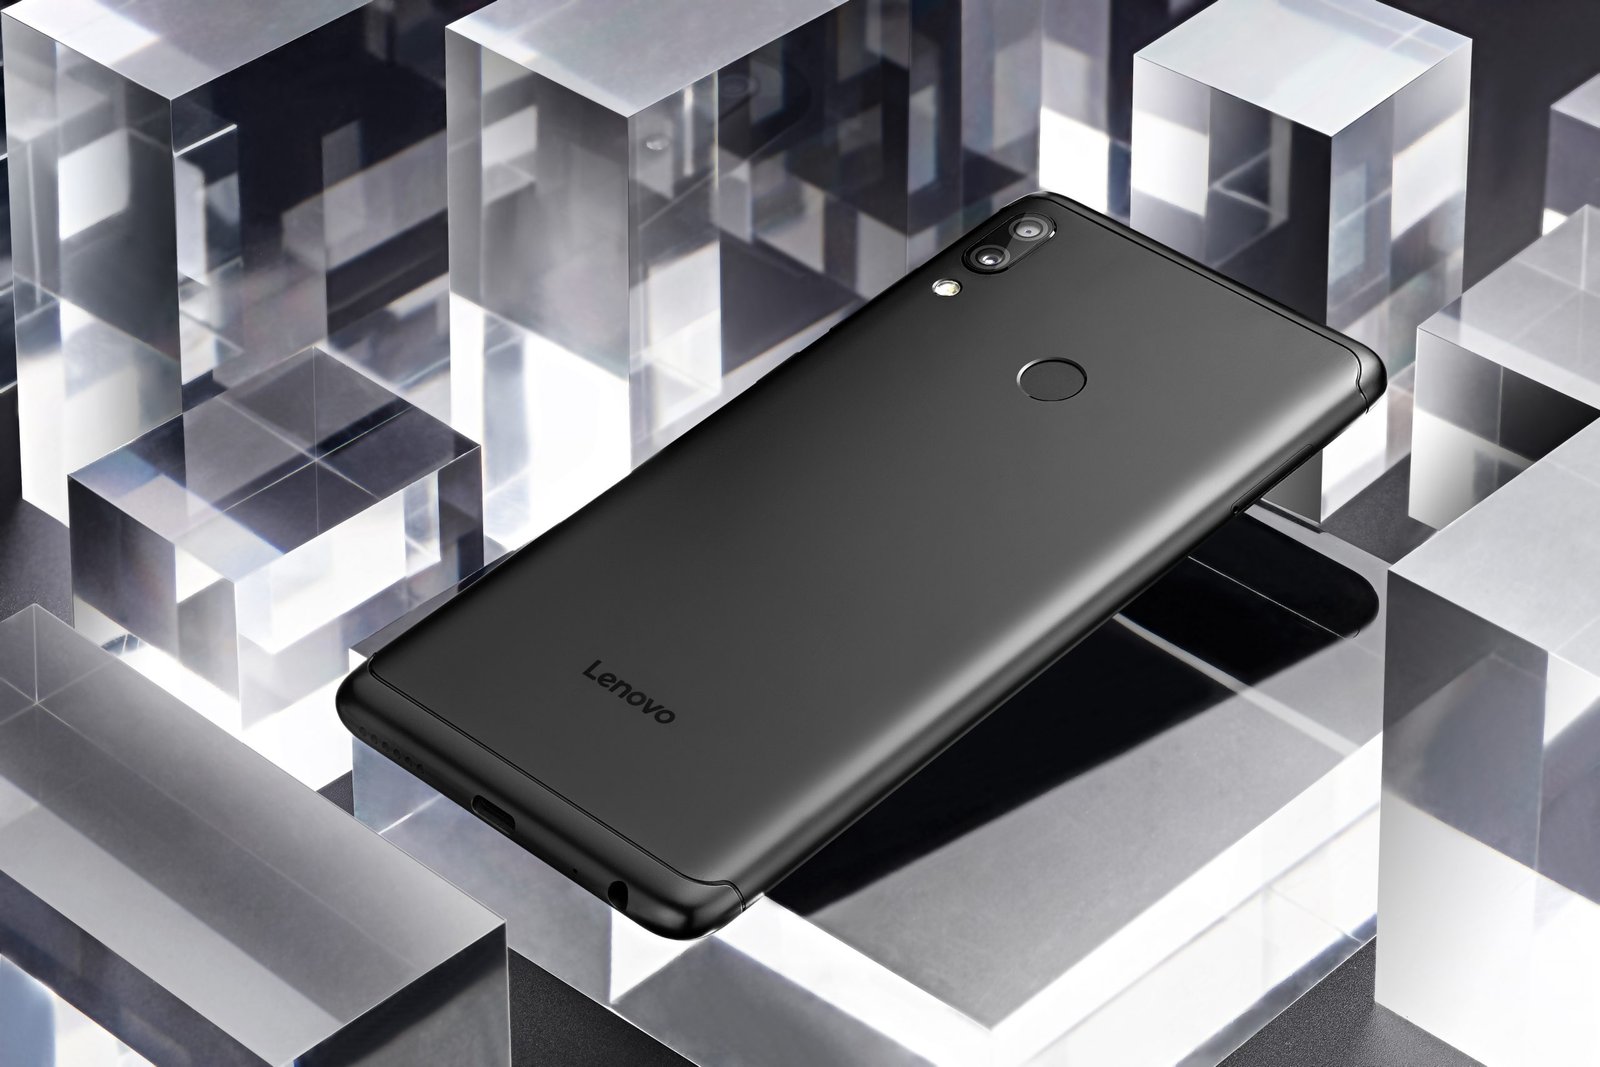 Lenovo Re Enters Ph Smartphone Market With New Models Launches A Range Of Smart Home Devices For The First Time Techbroll